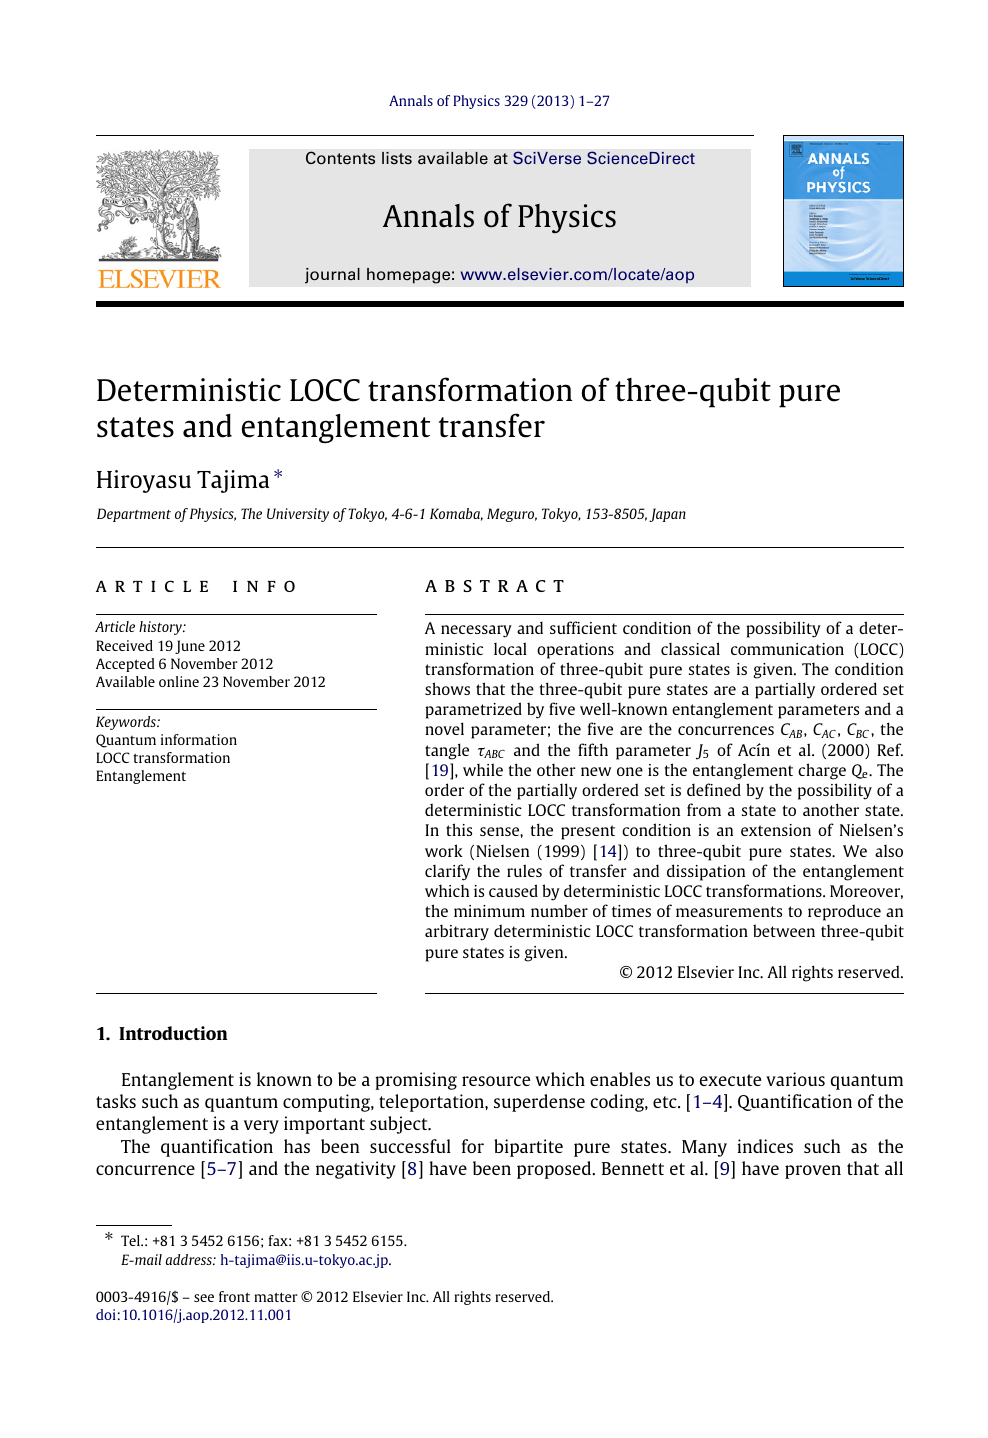 Deterministic Locc Transformation Of Three Qubit Pure States And Entanglement Transfer Topic Of Research Paper In Physical Sciences Download Scholarly Article Pdf And Read For Free On Cyberleninka Open Science Hub